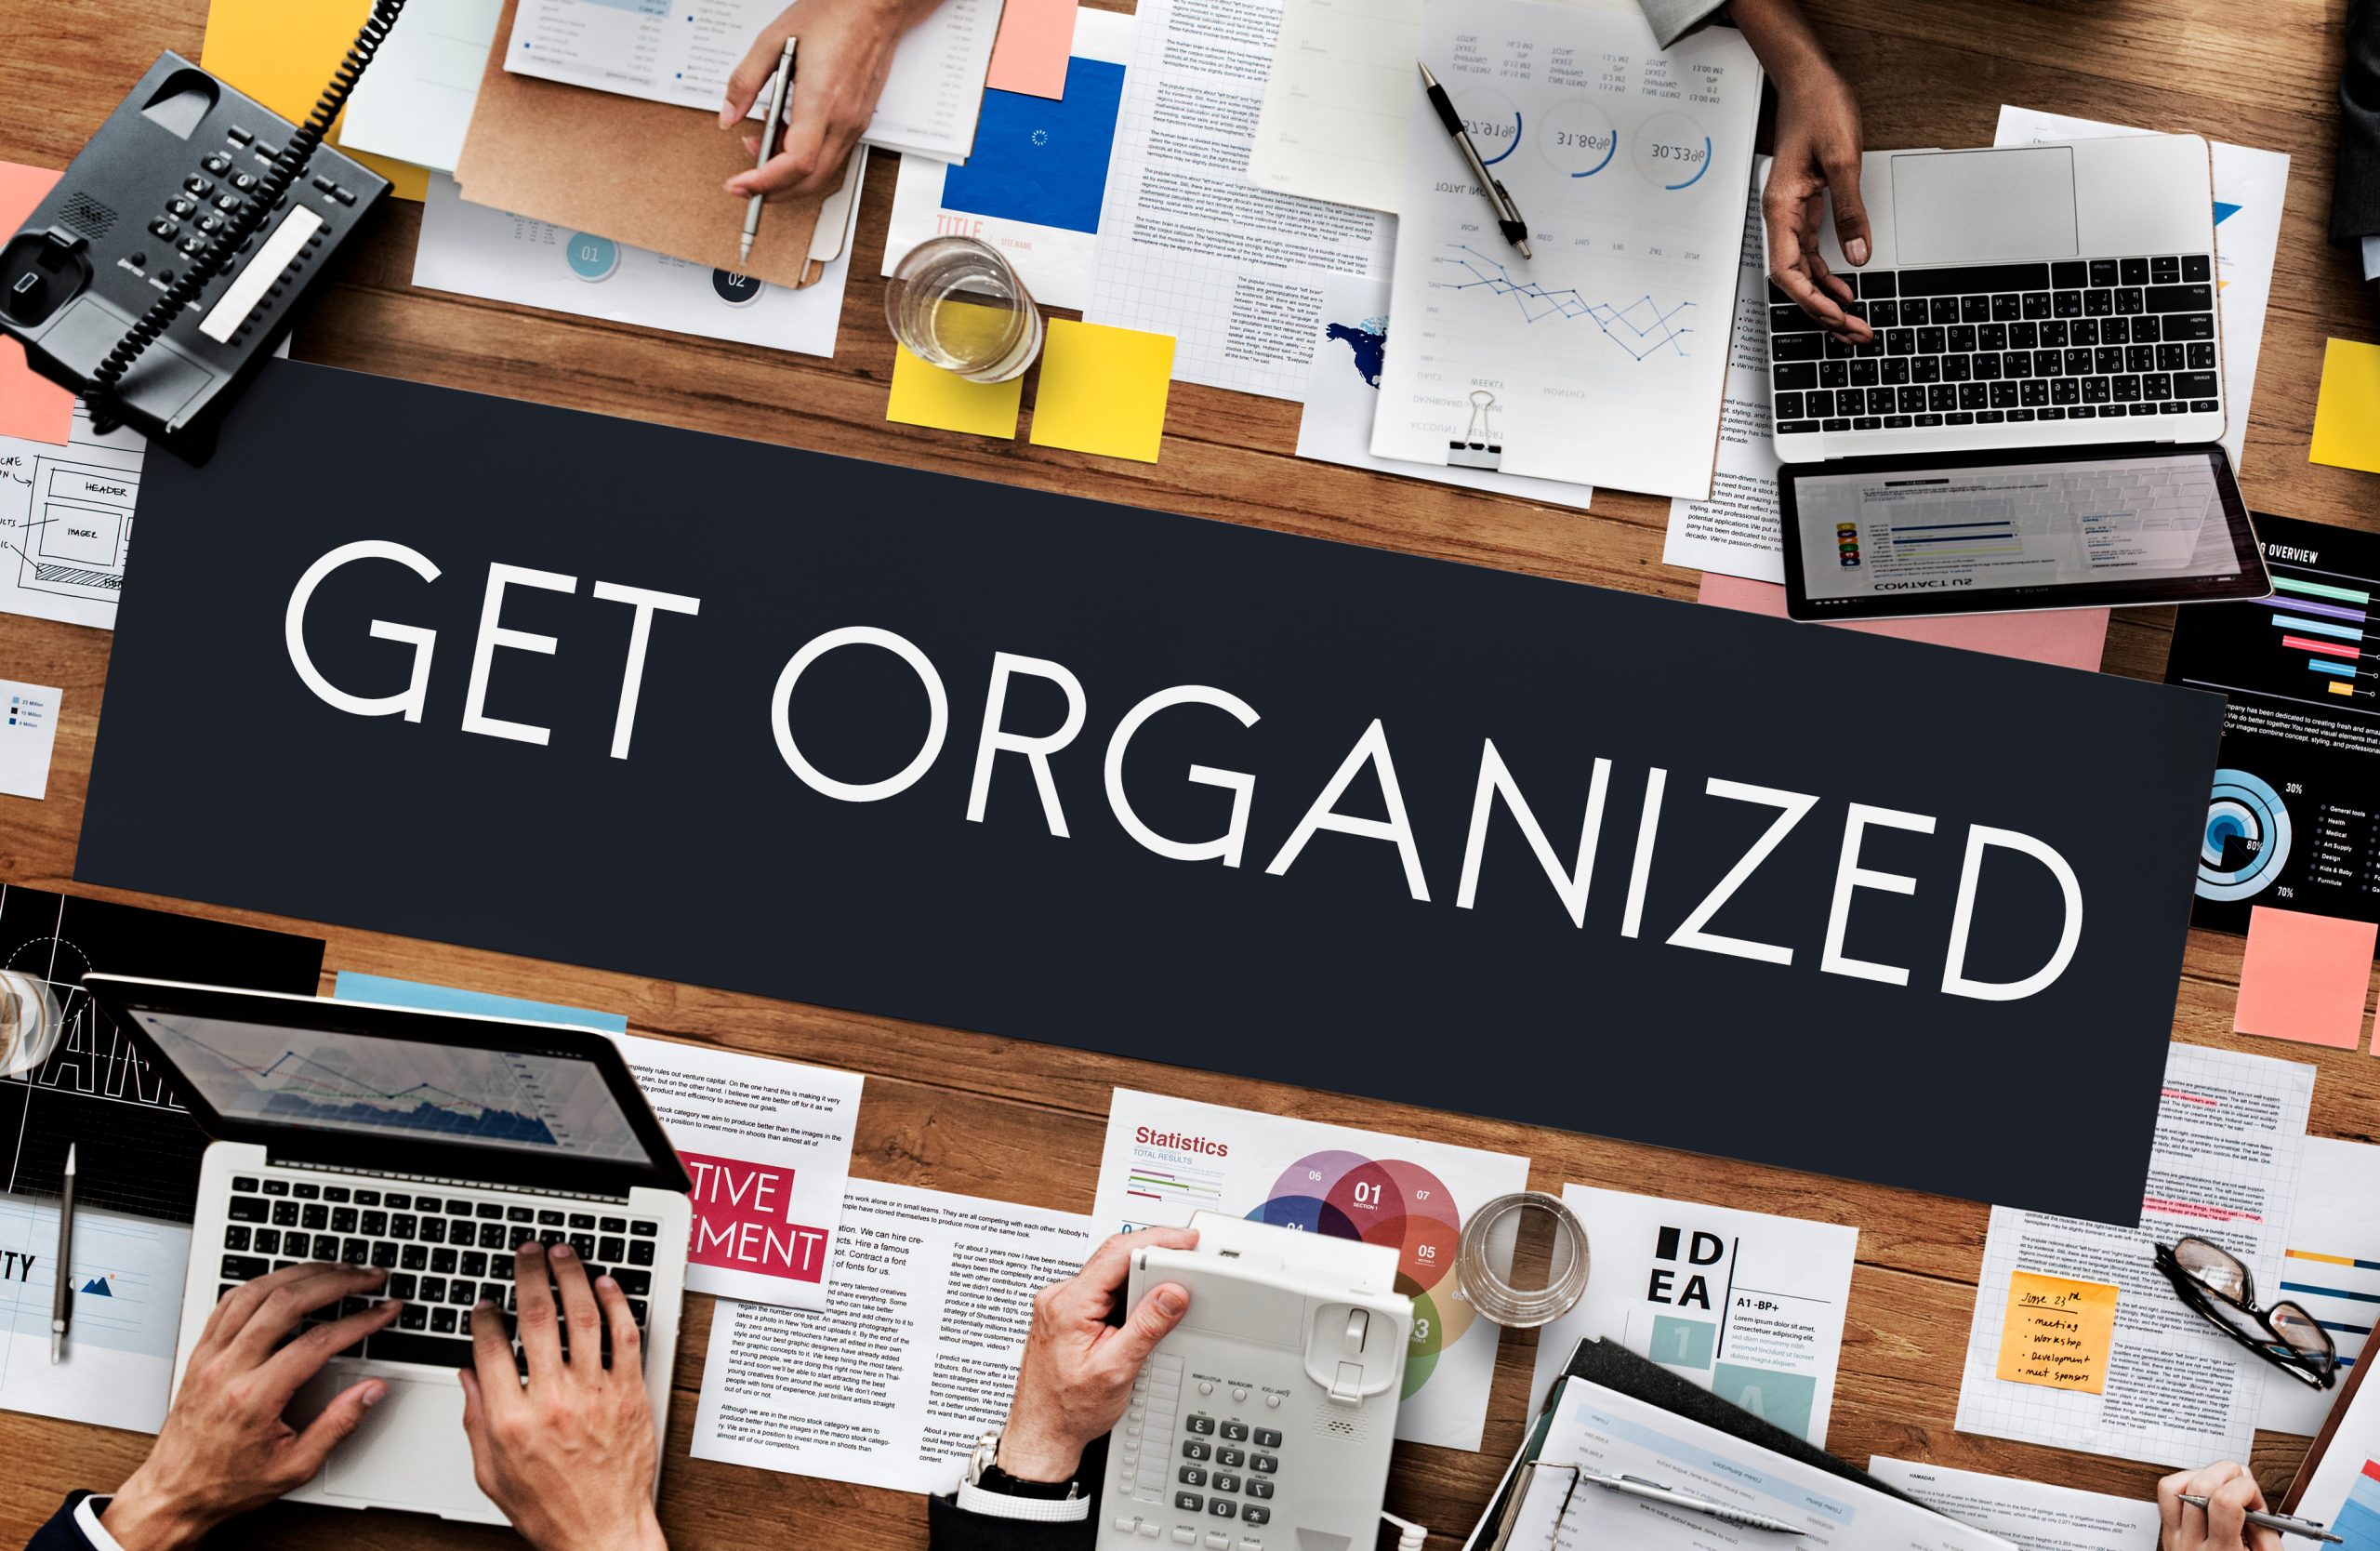 7 Tips to Organize Your Digital Assets for Success